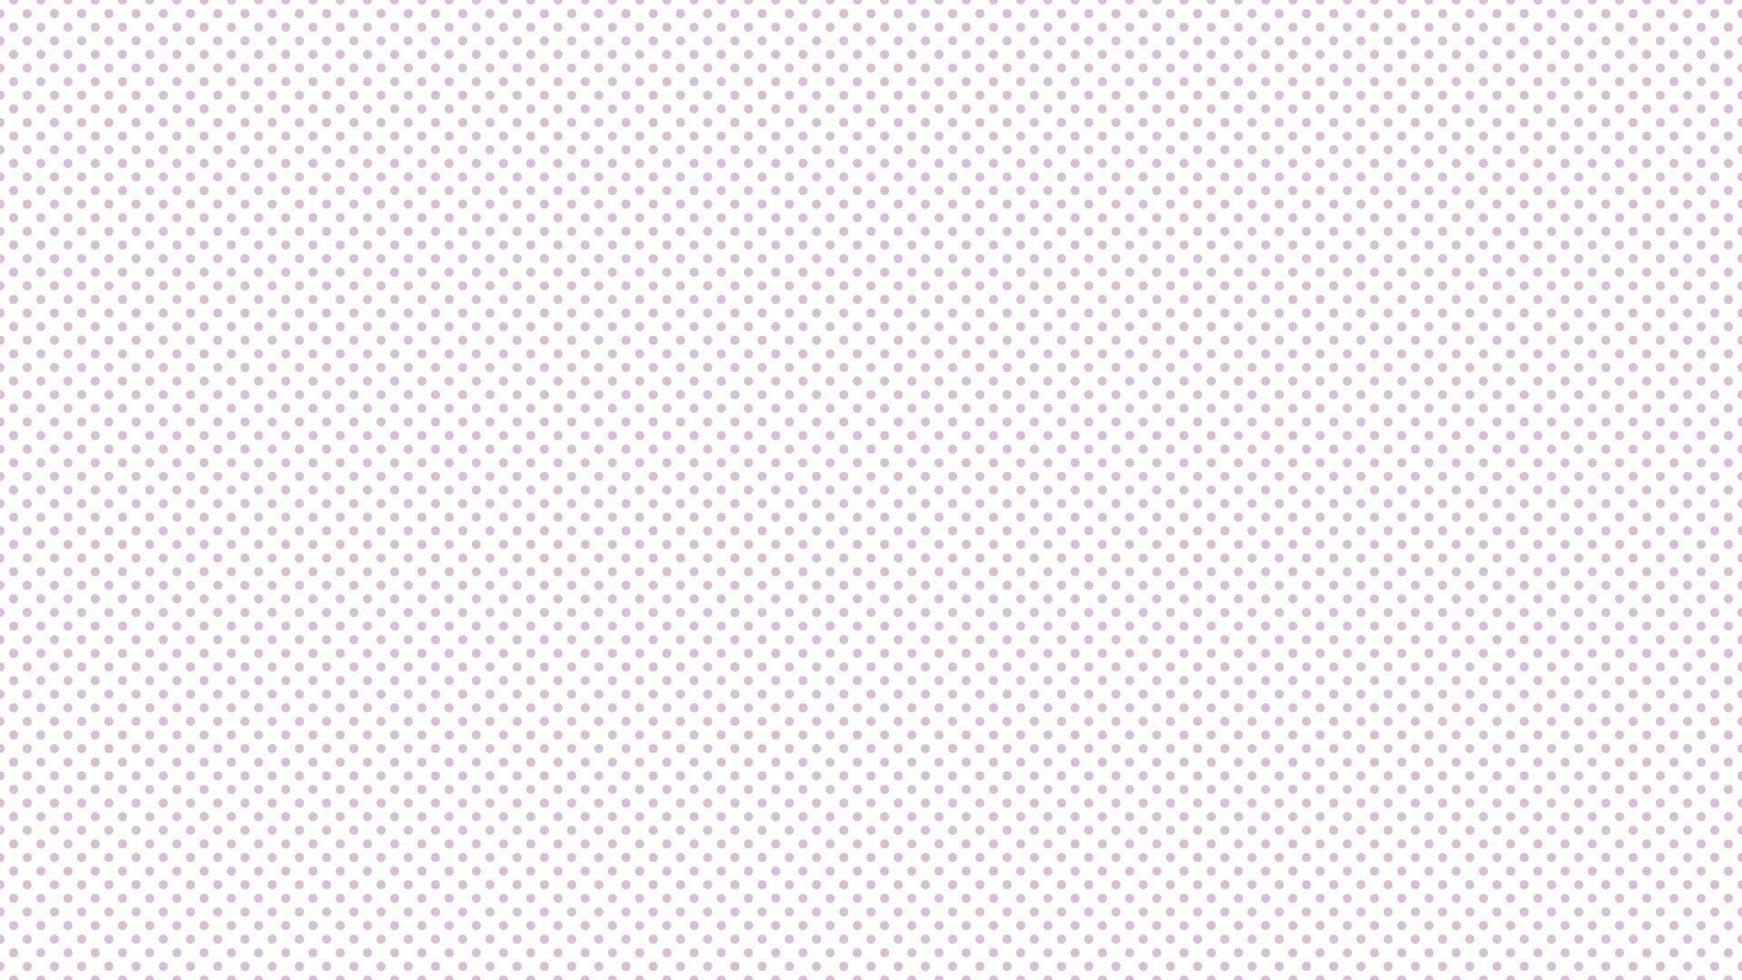 thistle purple color polka dots background vector